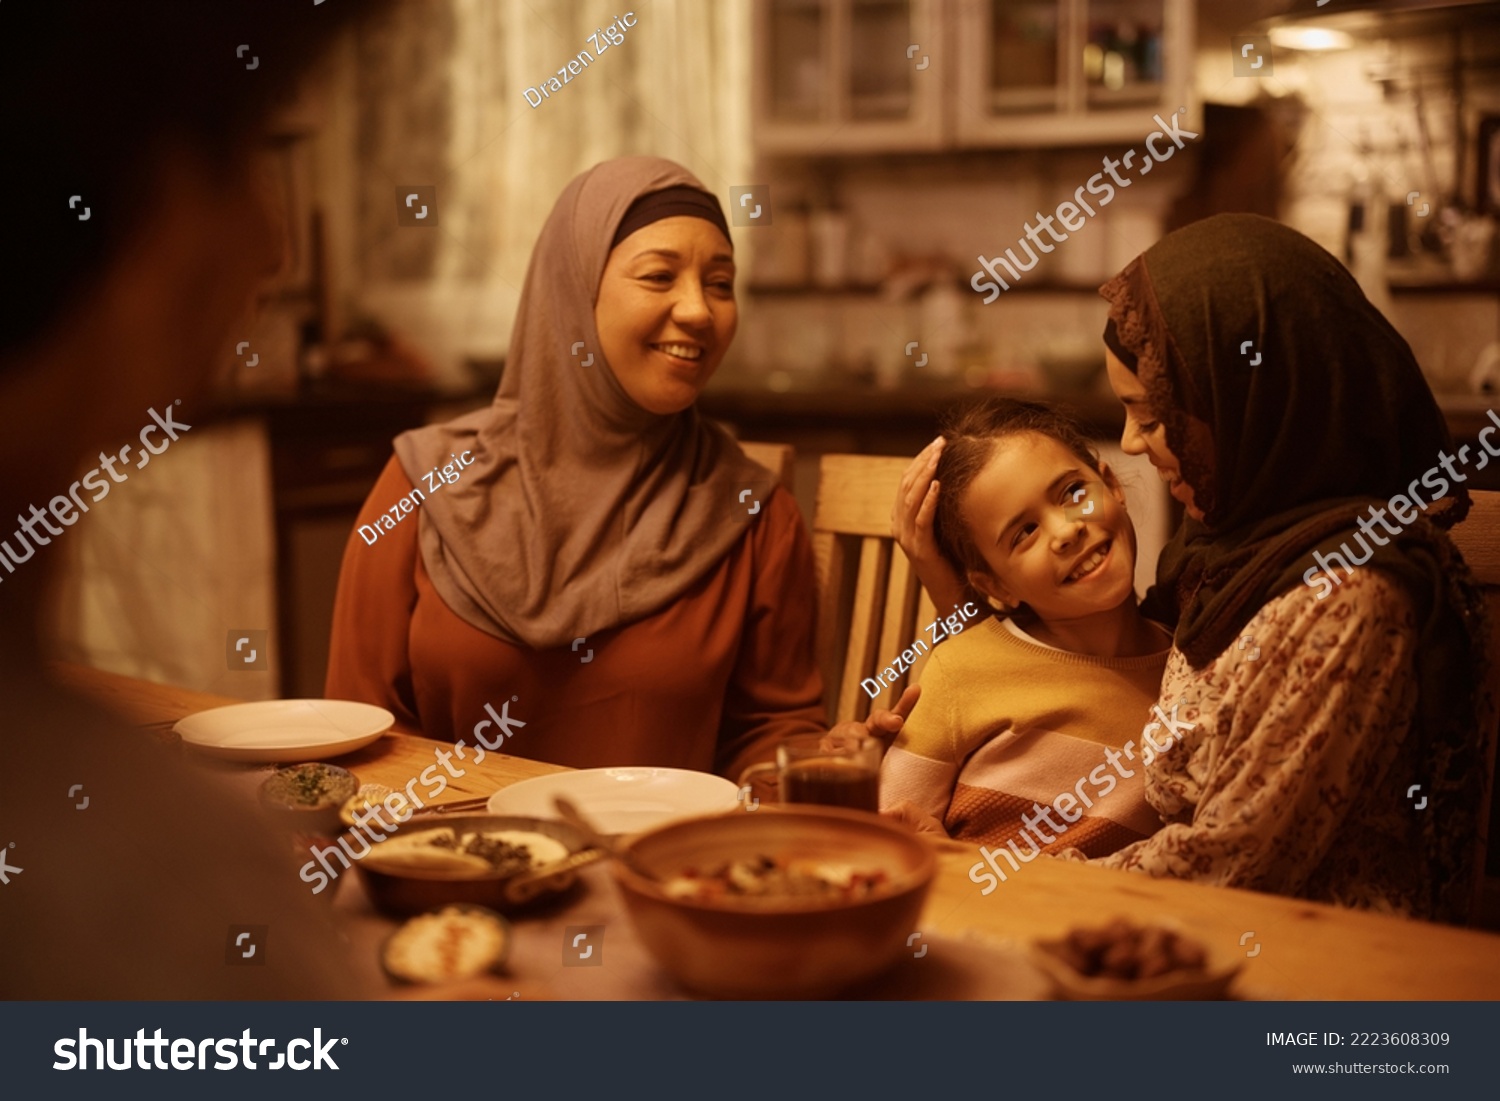 Happy Middle Eastern girl having dinner with extended family in dining room. #2223608309